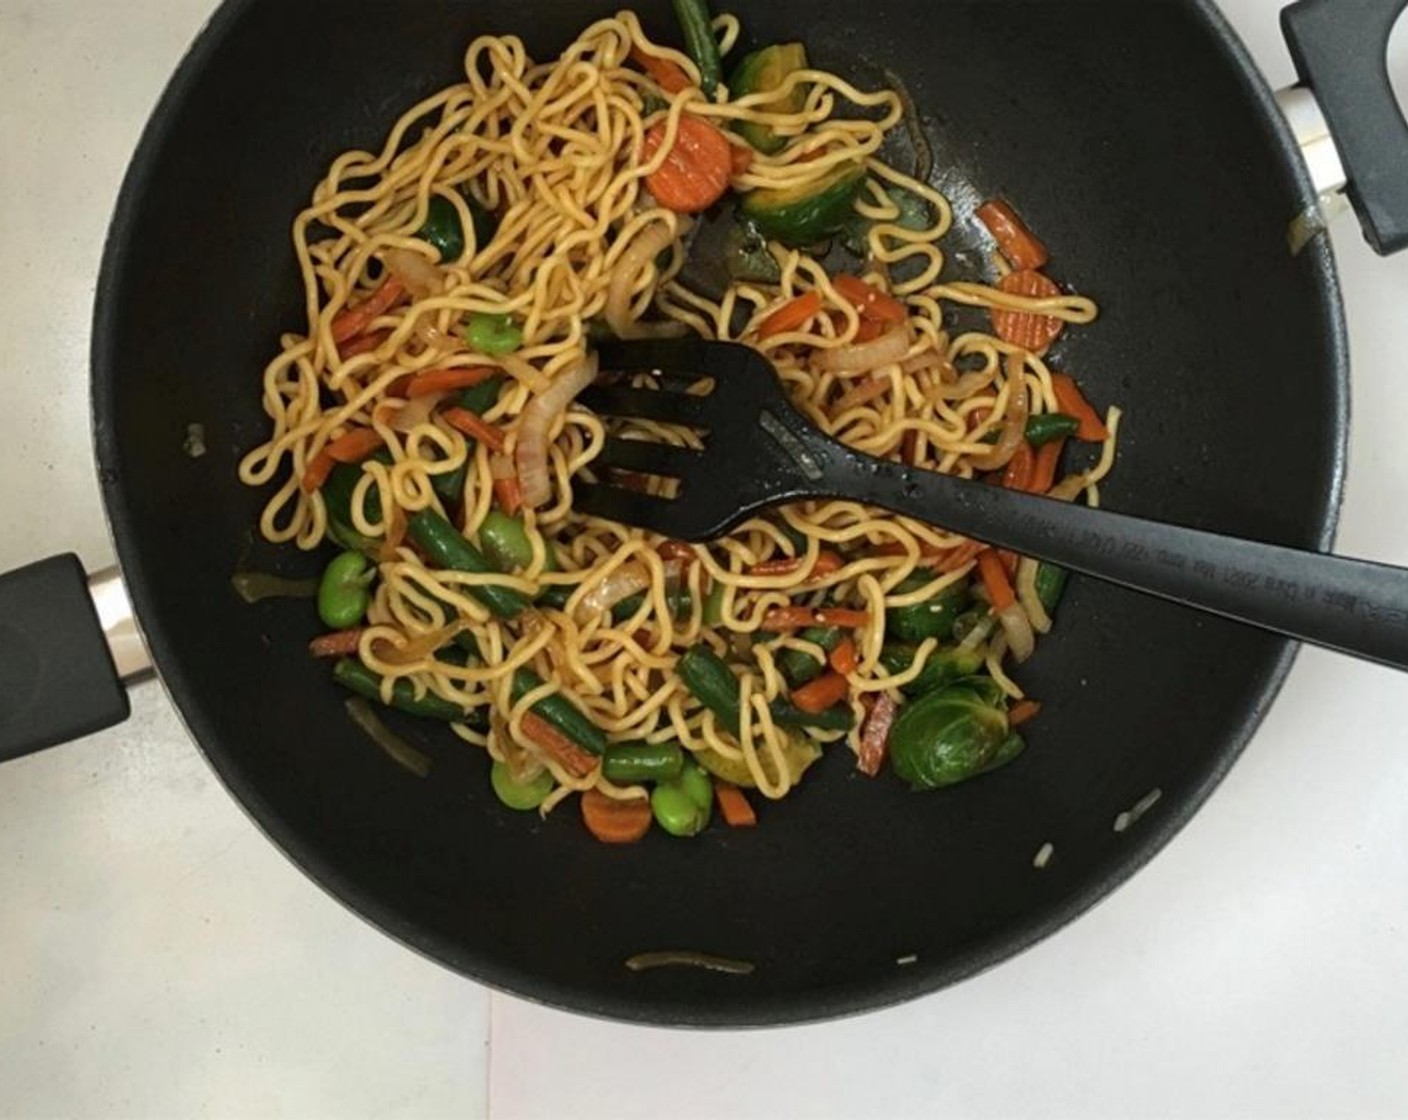 step 5 Stir fry the vegetables and noodles for 3 minutes. Then check the seasoning and add extra pepper, oyster sauce, fish sauce, soy sauce or sesame oil to taste if necessary.